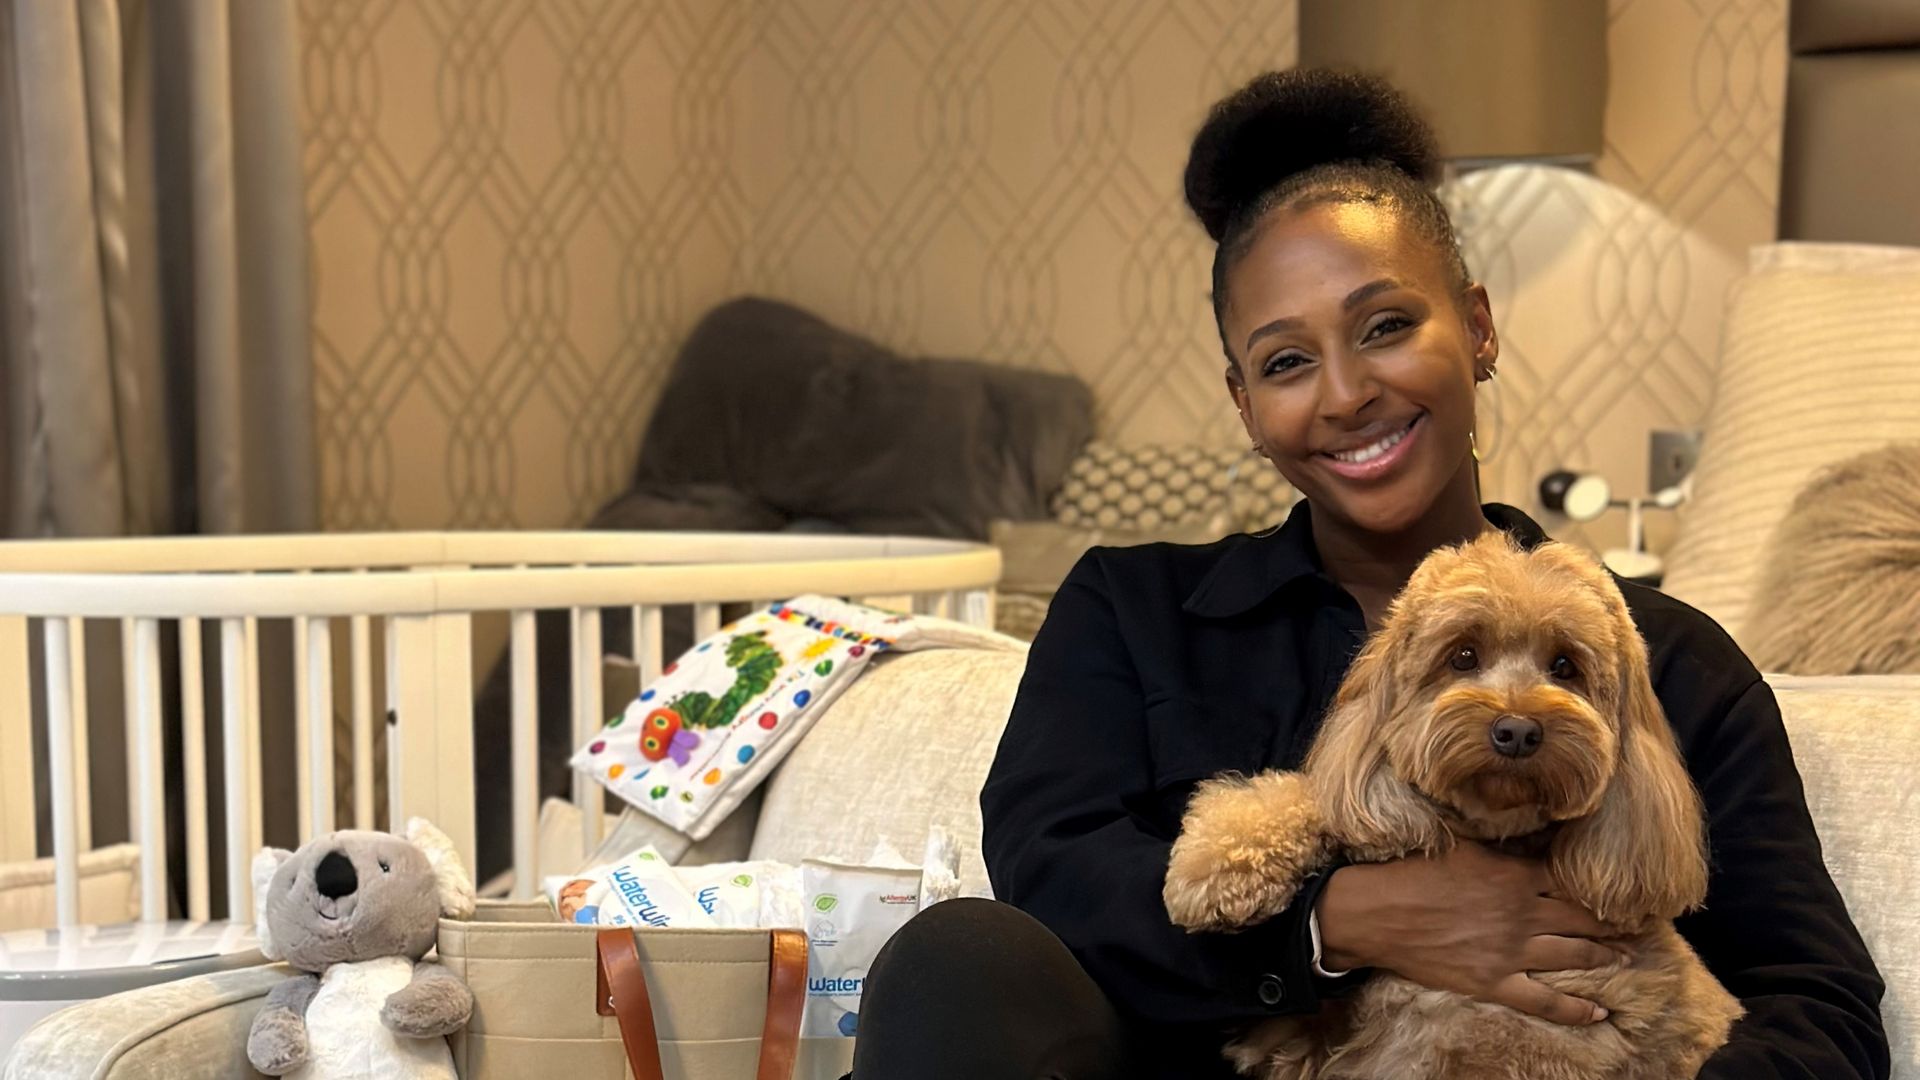 Exclusive: Alexandra Burke discusses newborn baby in rare insight into raising two children under two